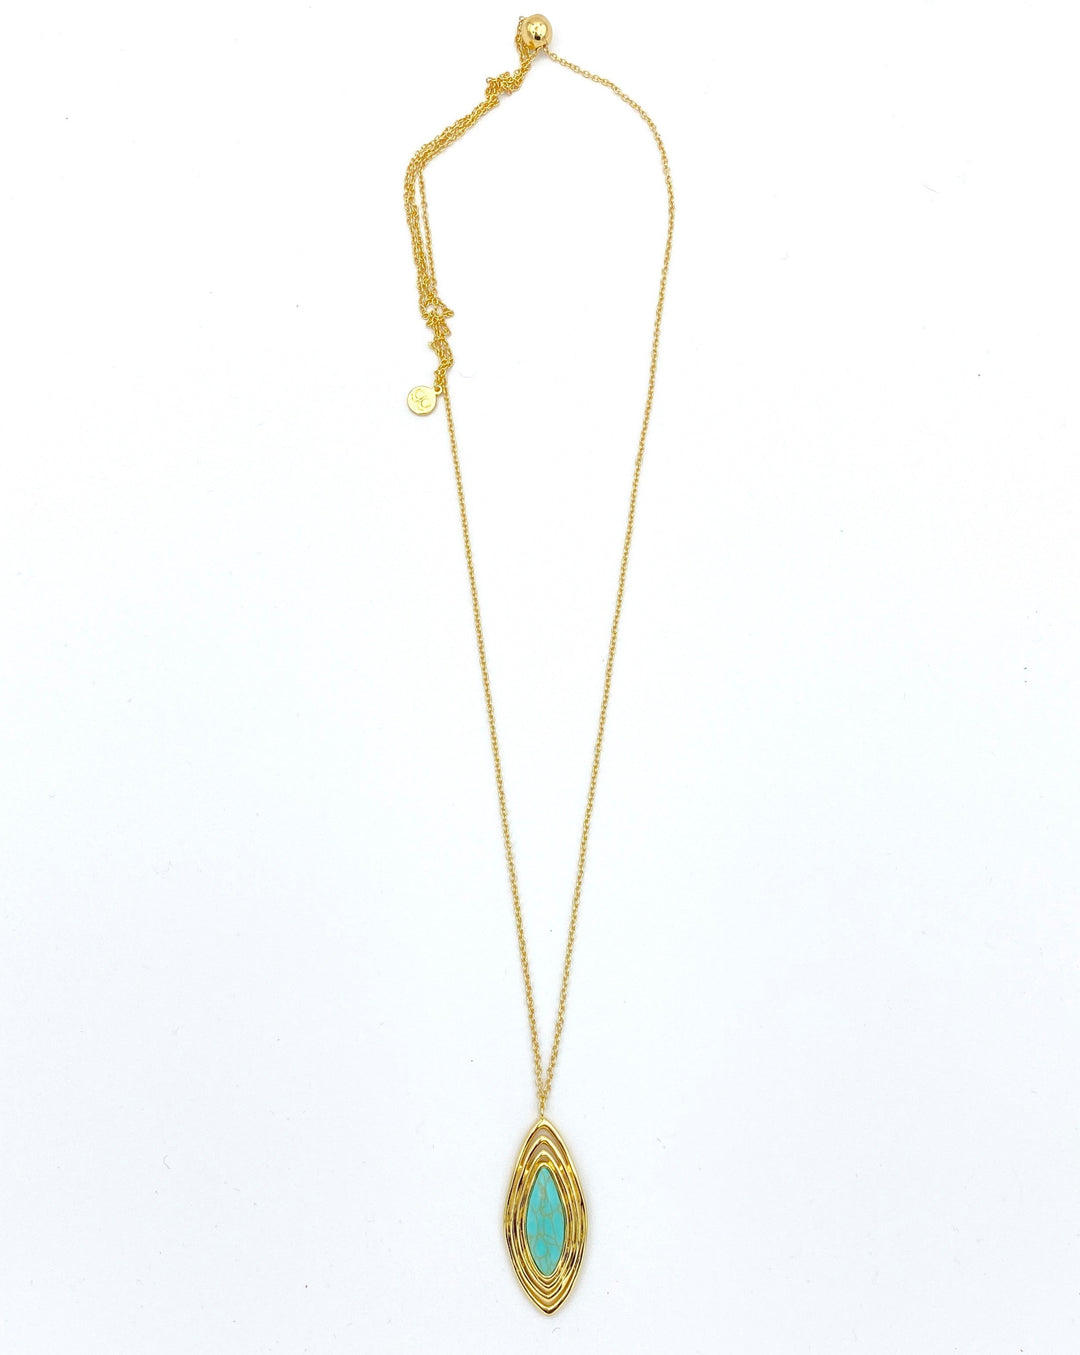 Gold Adjustable Necklace With Turquoise Pendant